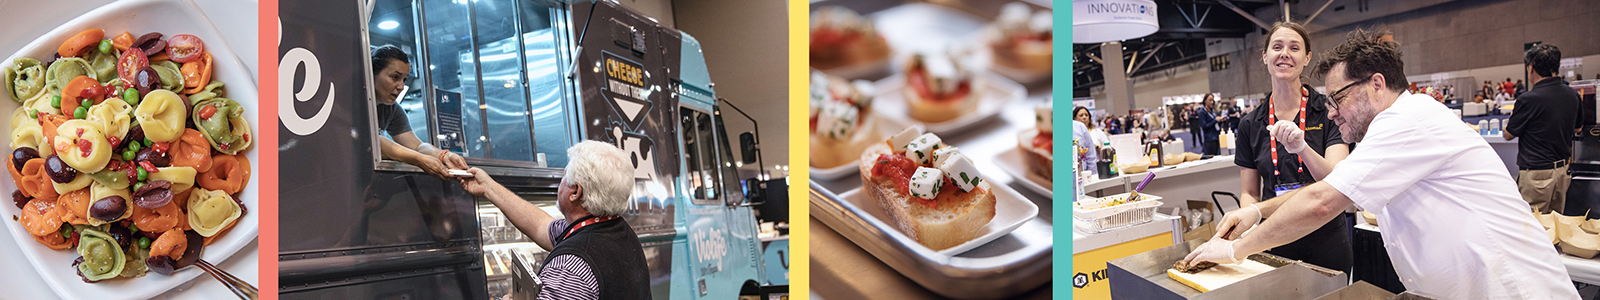 Four images of food, a food truck, and someone preparing food at our trade show.